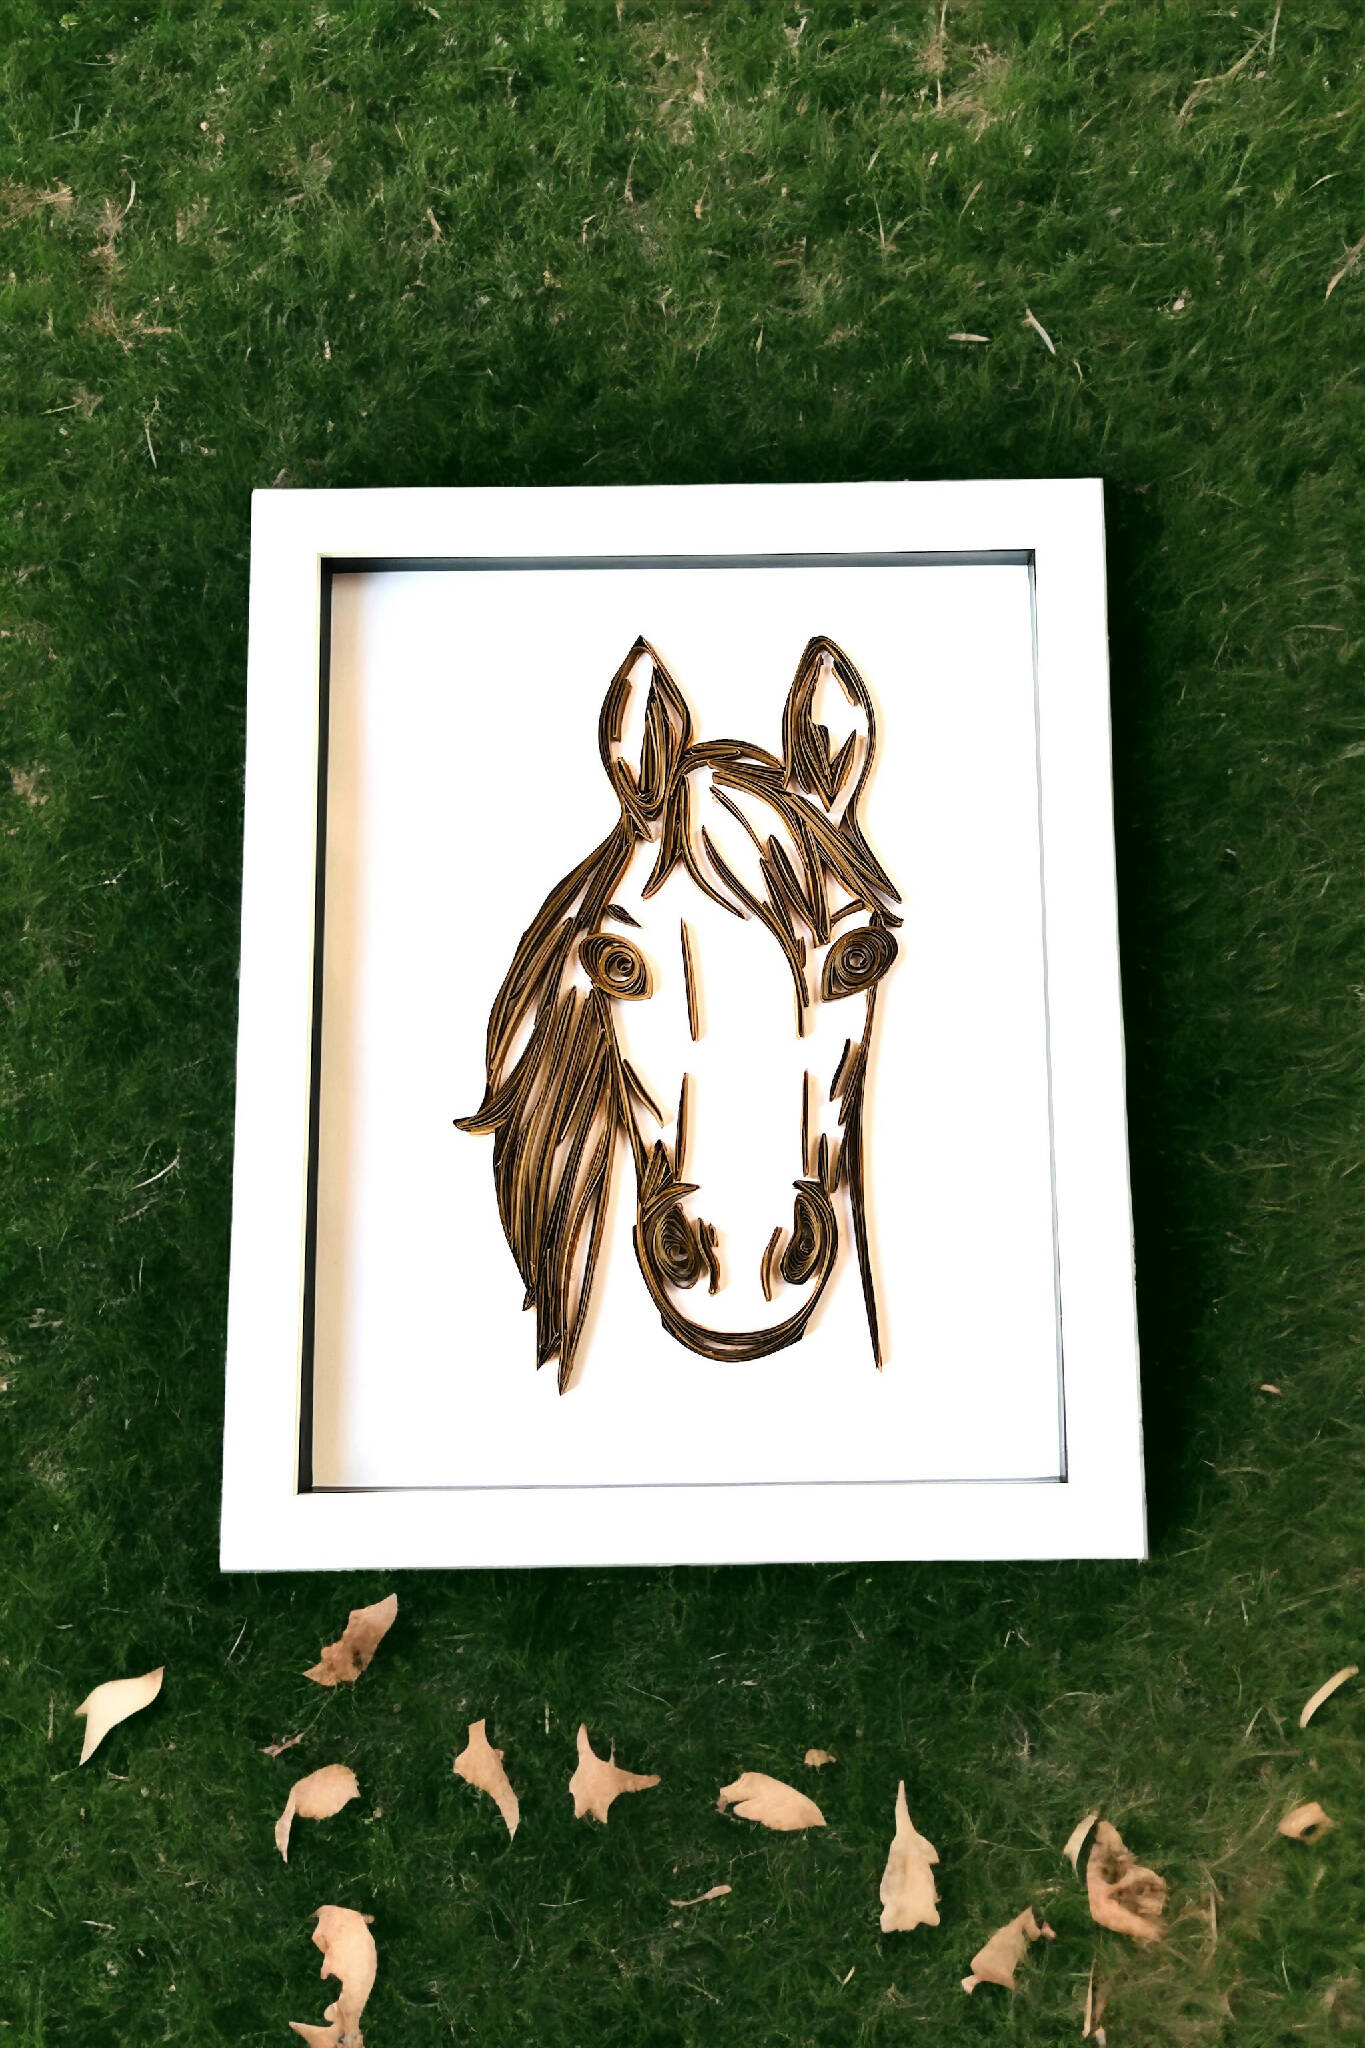 Quilled horse picture